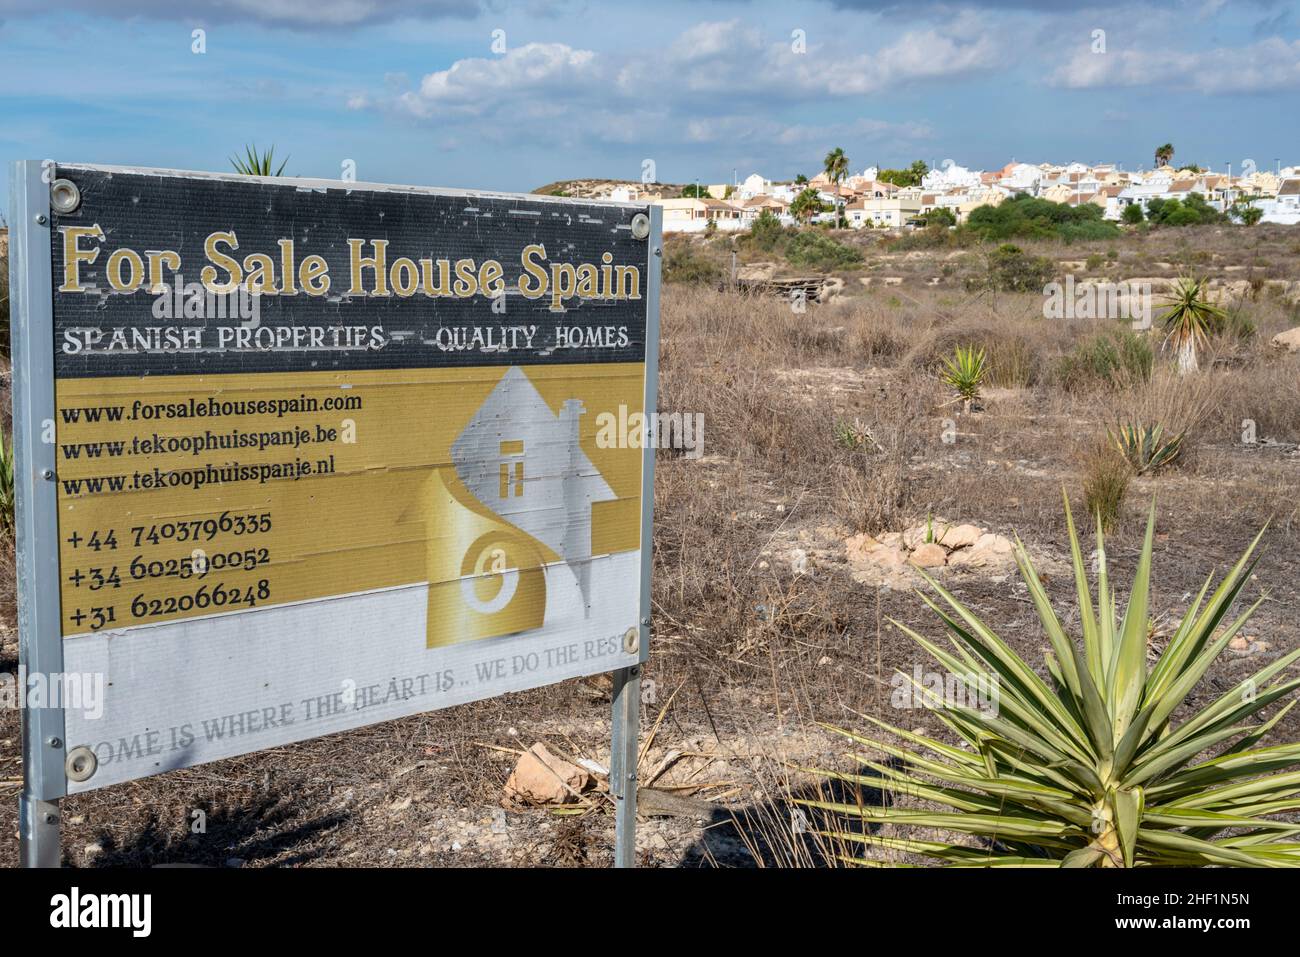 Decaying estate agent sign on empty shrubland in Camposol, Region de Murcia, Costa Calida, Spain, EU. A town popular with British ex pats. Property ad Stock Photo